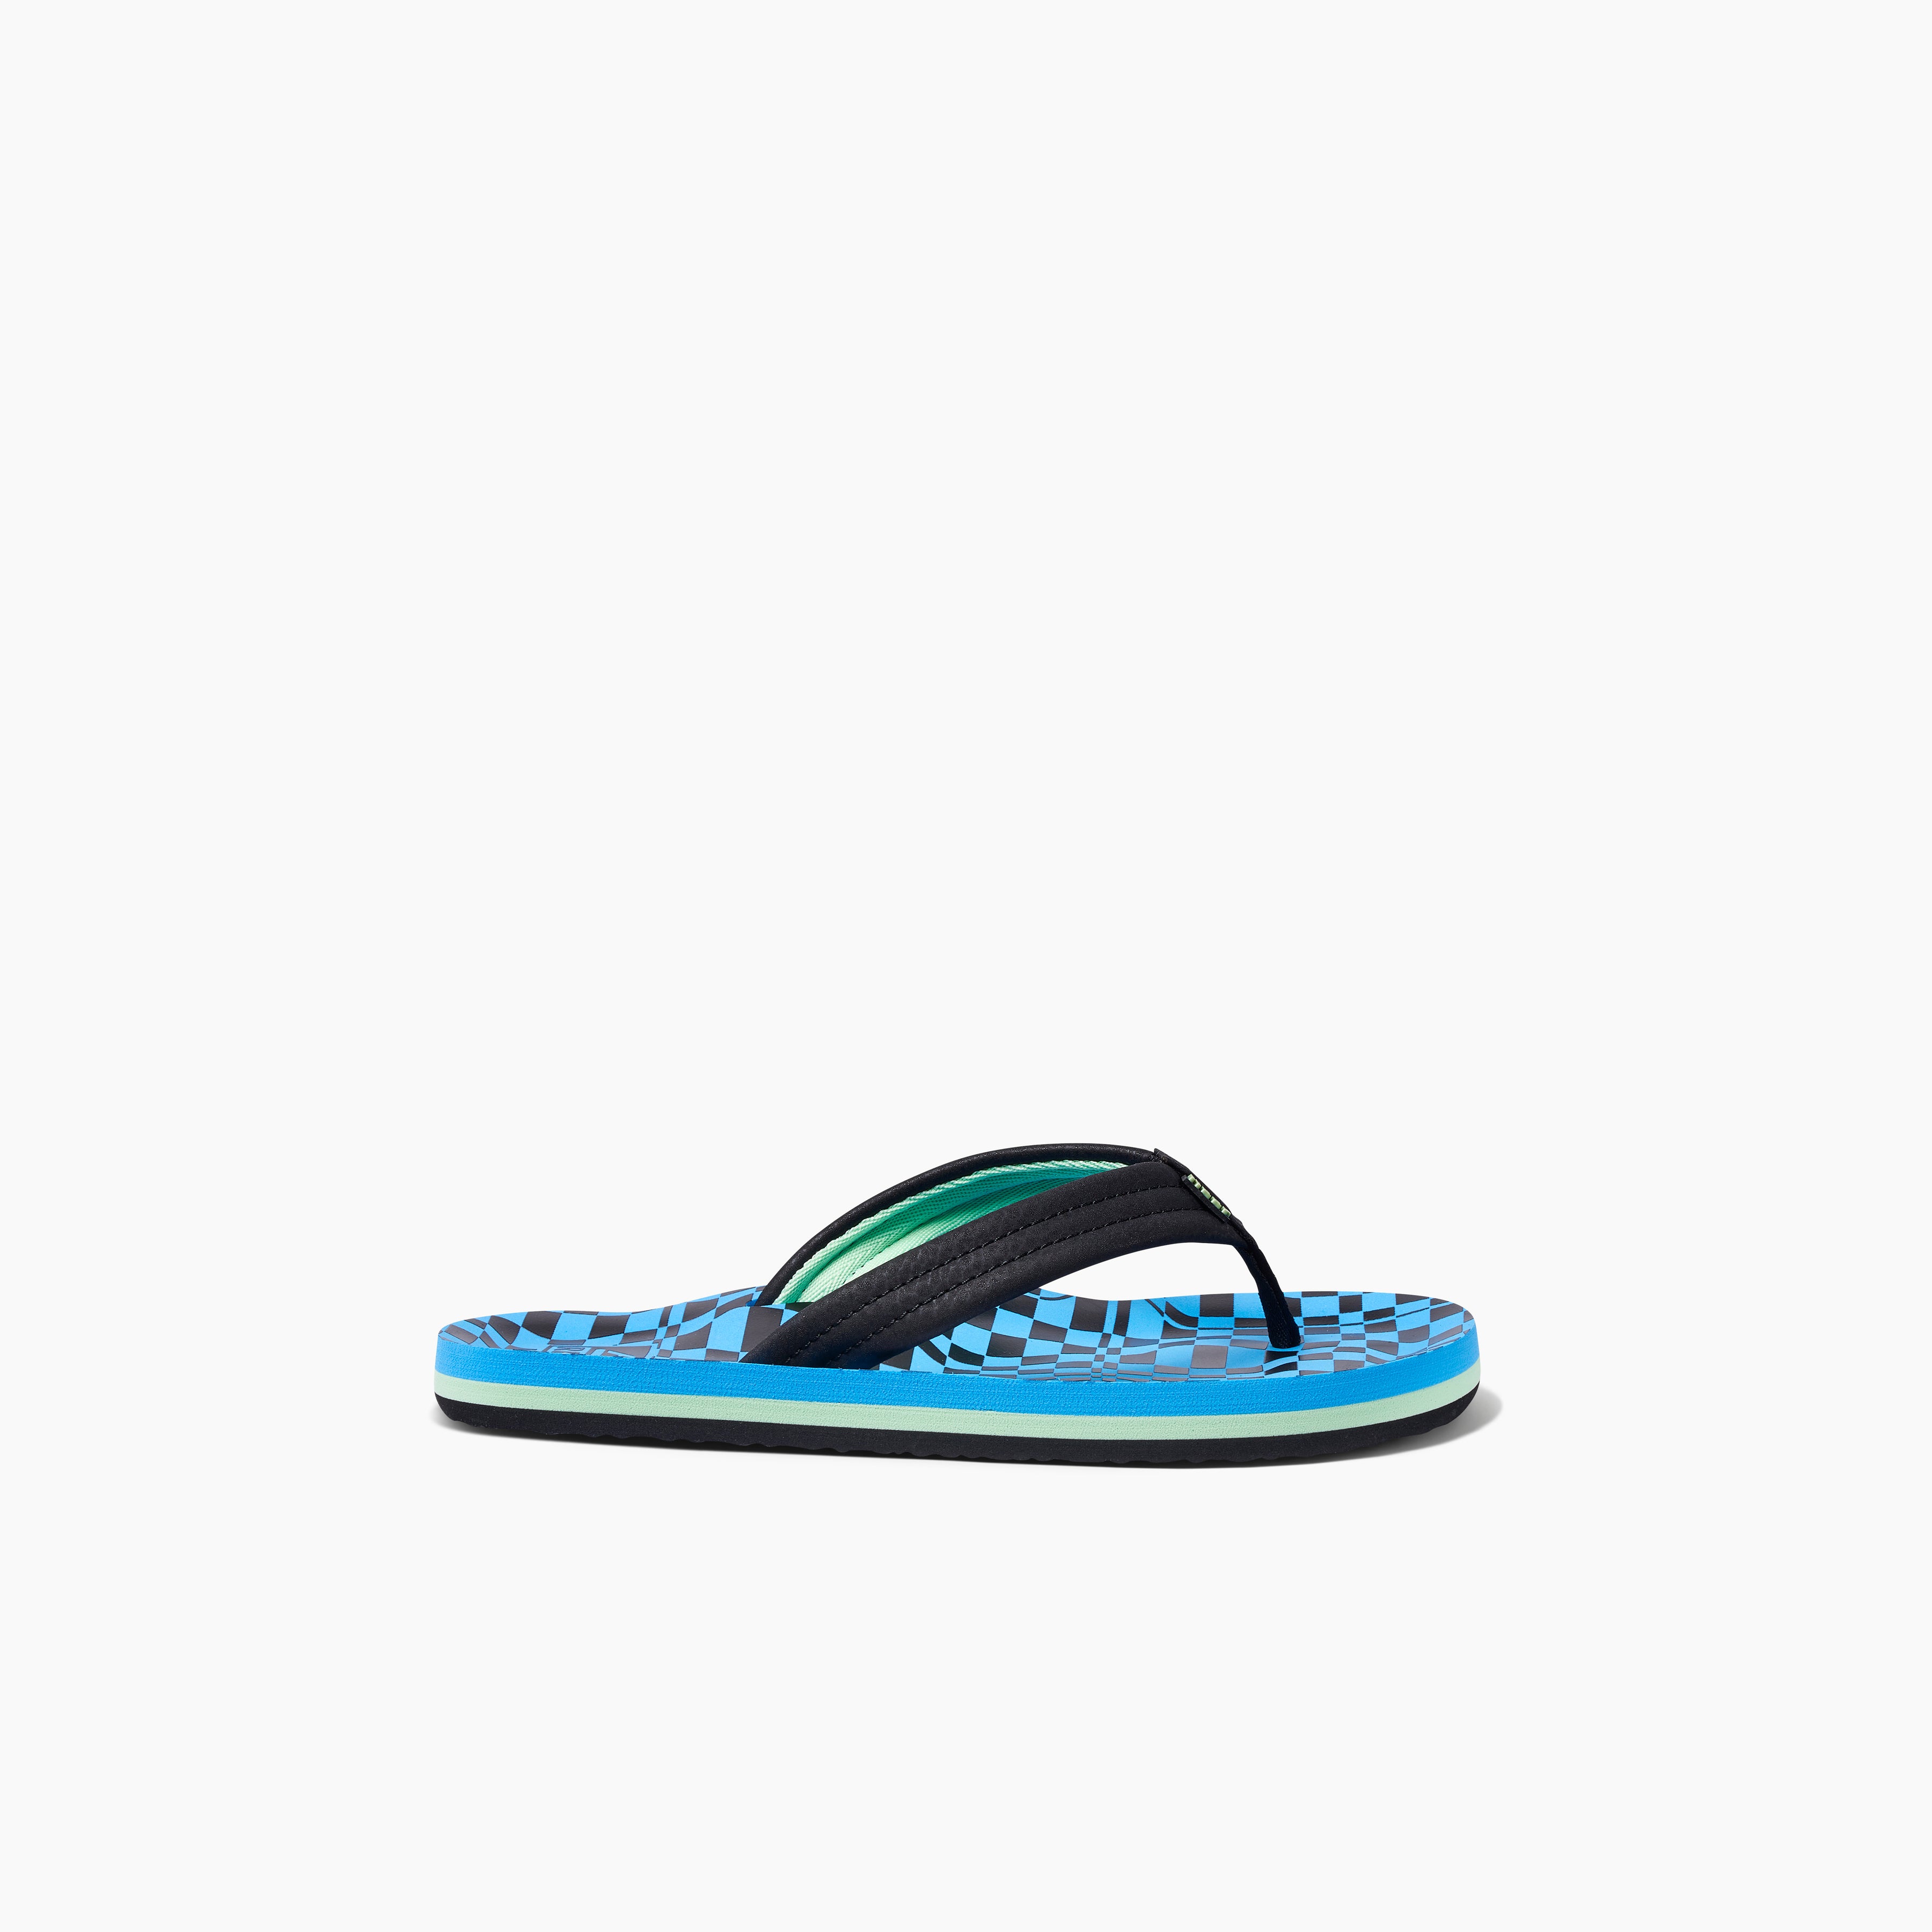 Boy's Sandals Kids Ahi in Swell Checkers side view